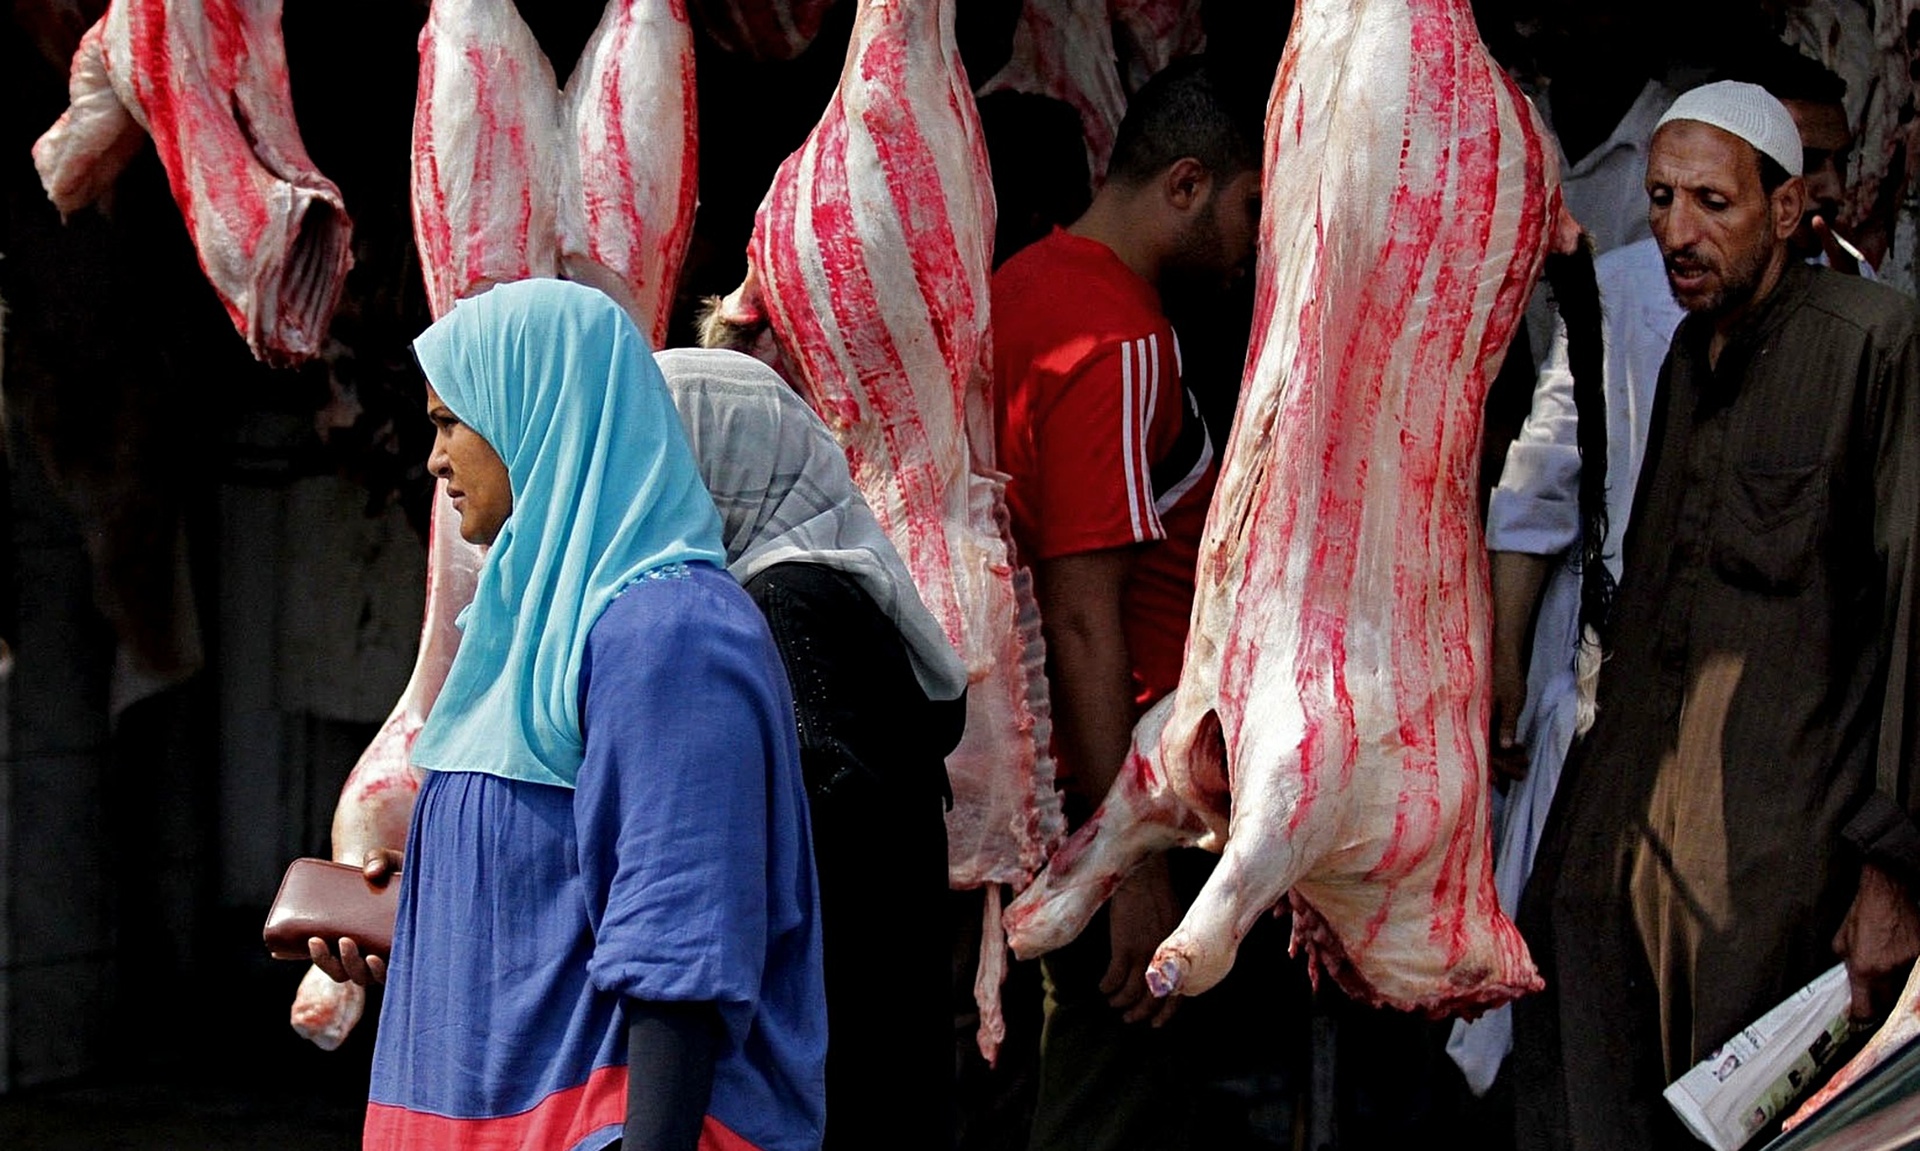  An Egyptian woman walks past meat displayed for sale in preparation for the Muslim holiday of Eid al-Adha at a market in Cairo in 2014. Photograph: Hussein Tallal/AP